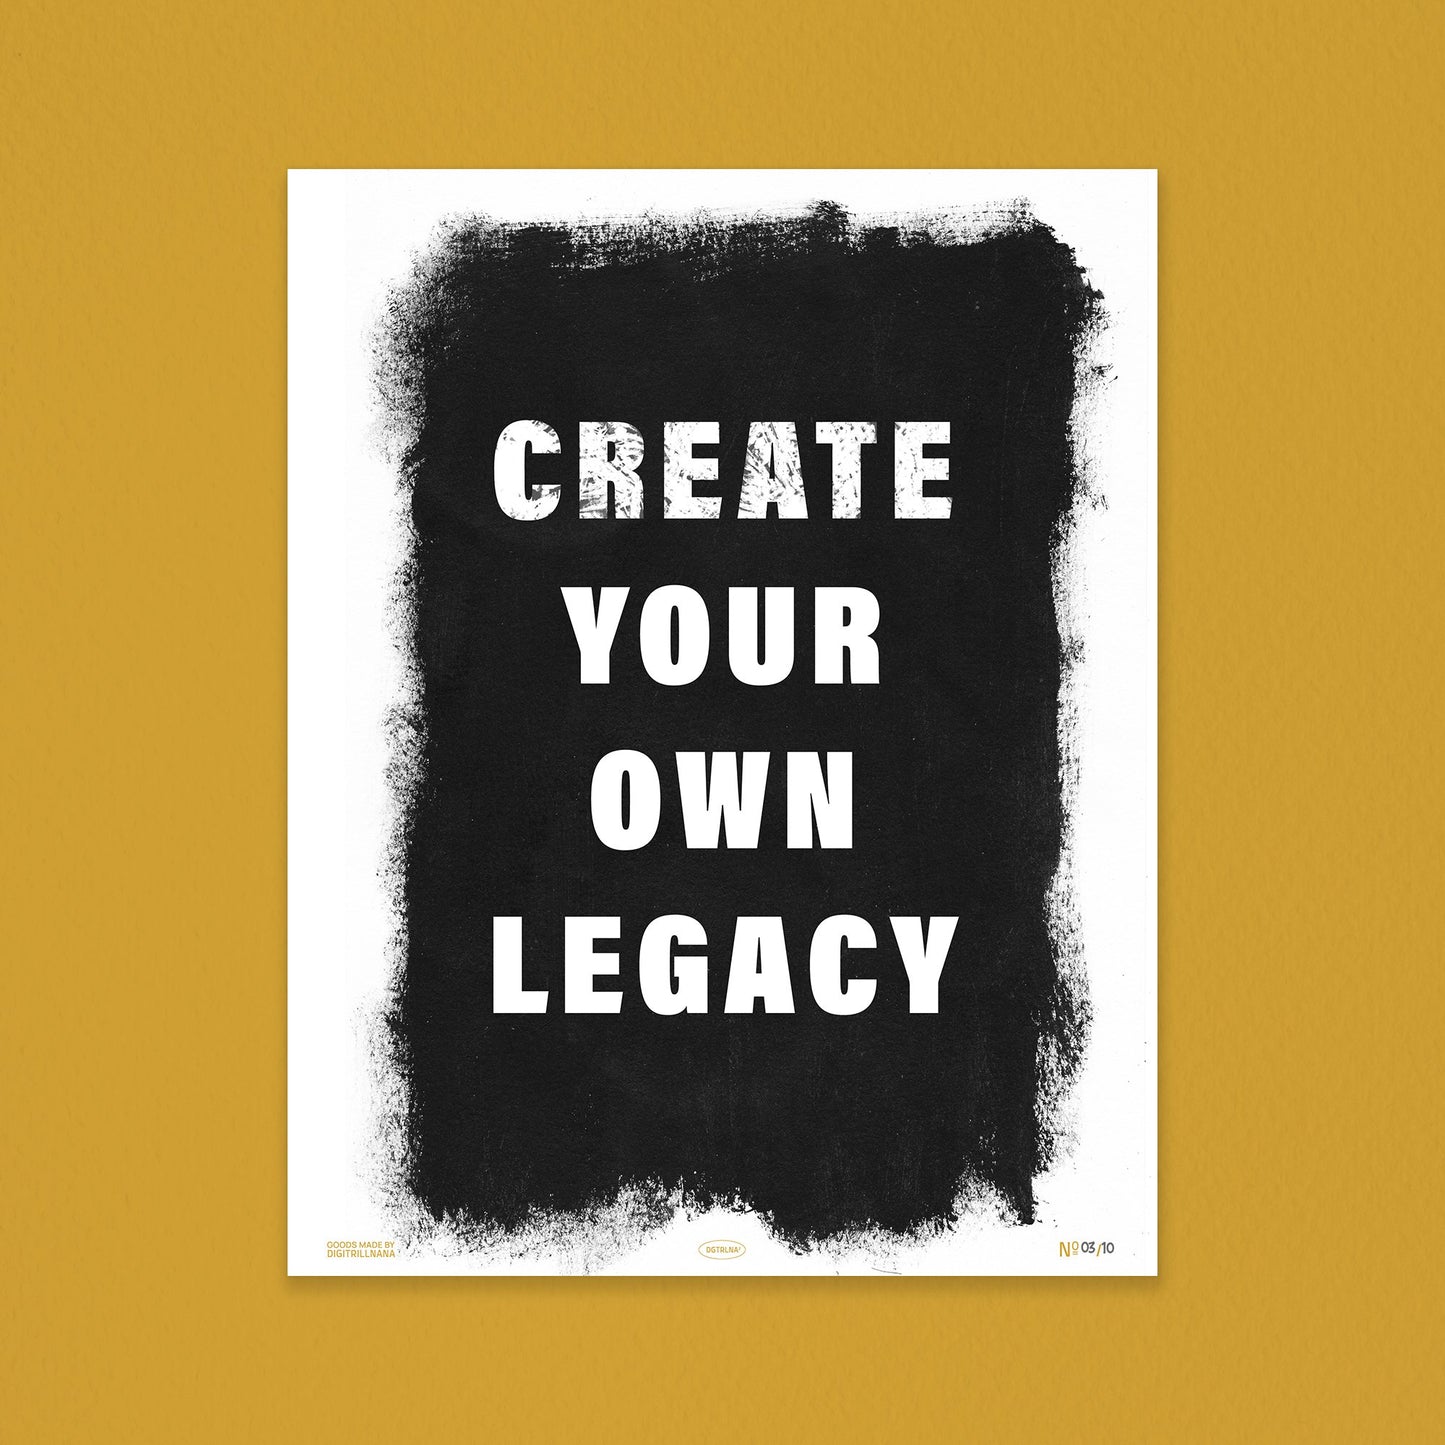 Create Your Own Legacy 11x14” typography inspirational quote, black and white art print from Goods Made By Digitrillnana, Ashley Fletcher. Perfect for home decor, wall art, art prints, and more! Black Woman Owned.